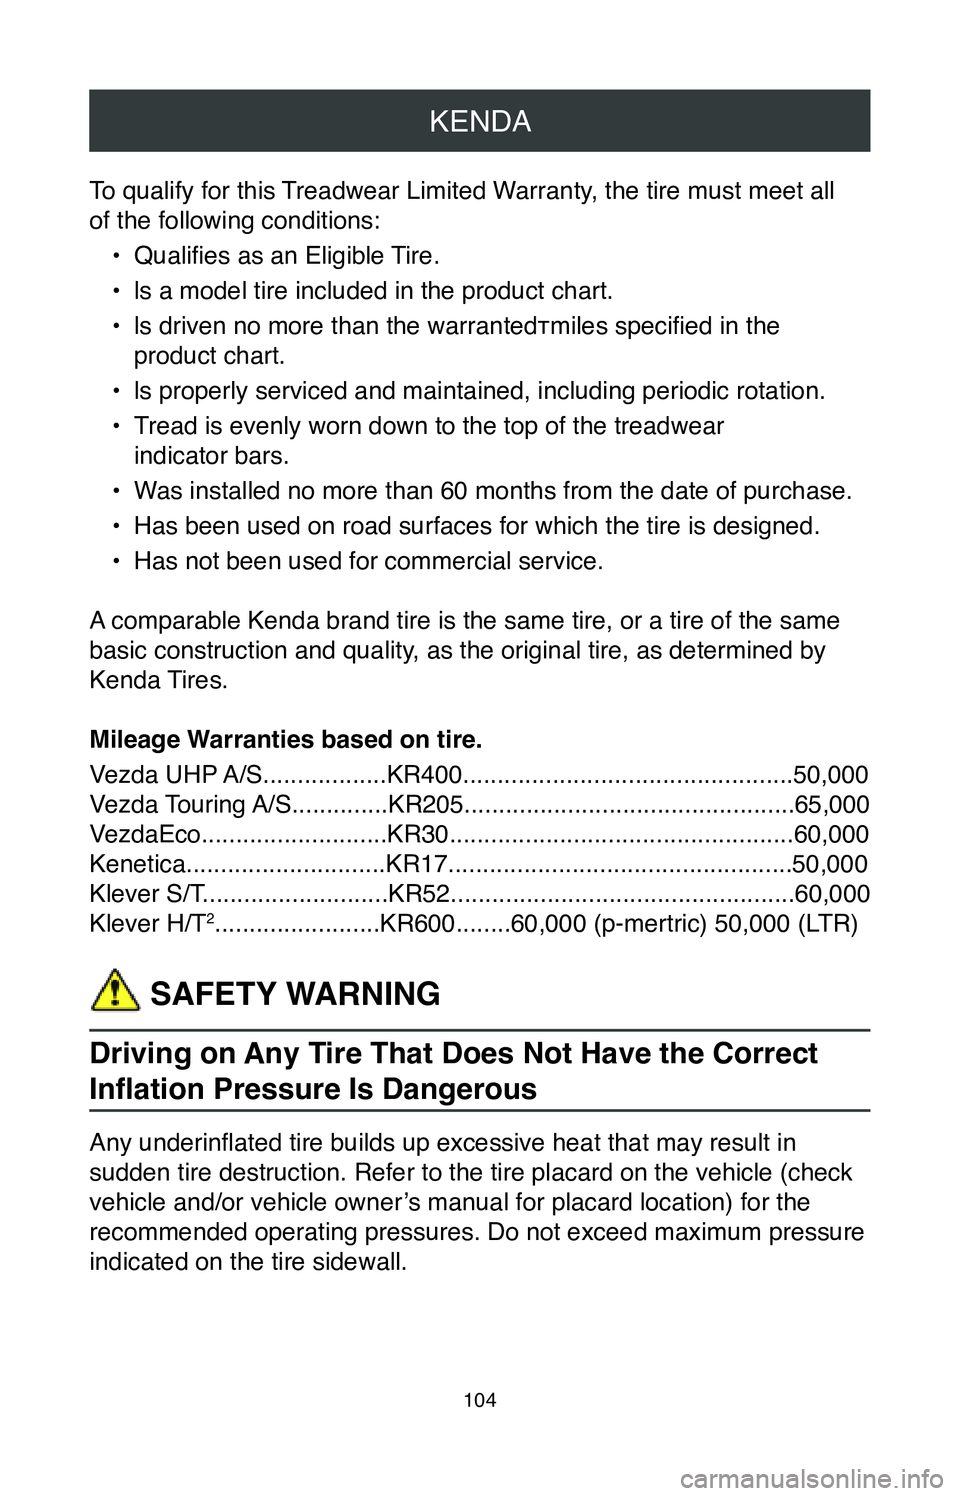 TOYOTA COROLLA 2020  Warranties & Maintenance Guides (in English) KENDA
104
To qualify for this Treadwear Limited Warranty, the tire must meet all  
of the following conditions:•
 Qualifies as an Eligible Tire.
•
 ls a model tire included in the product chart.
�